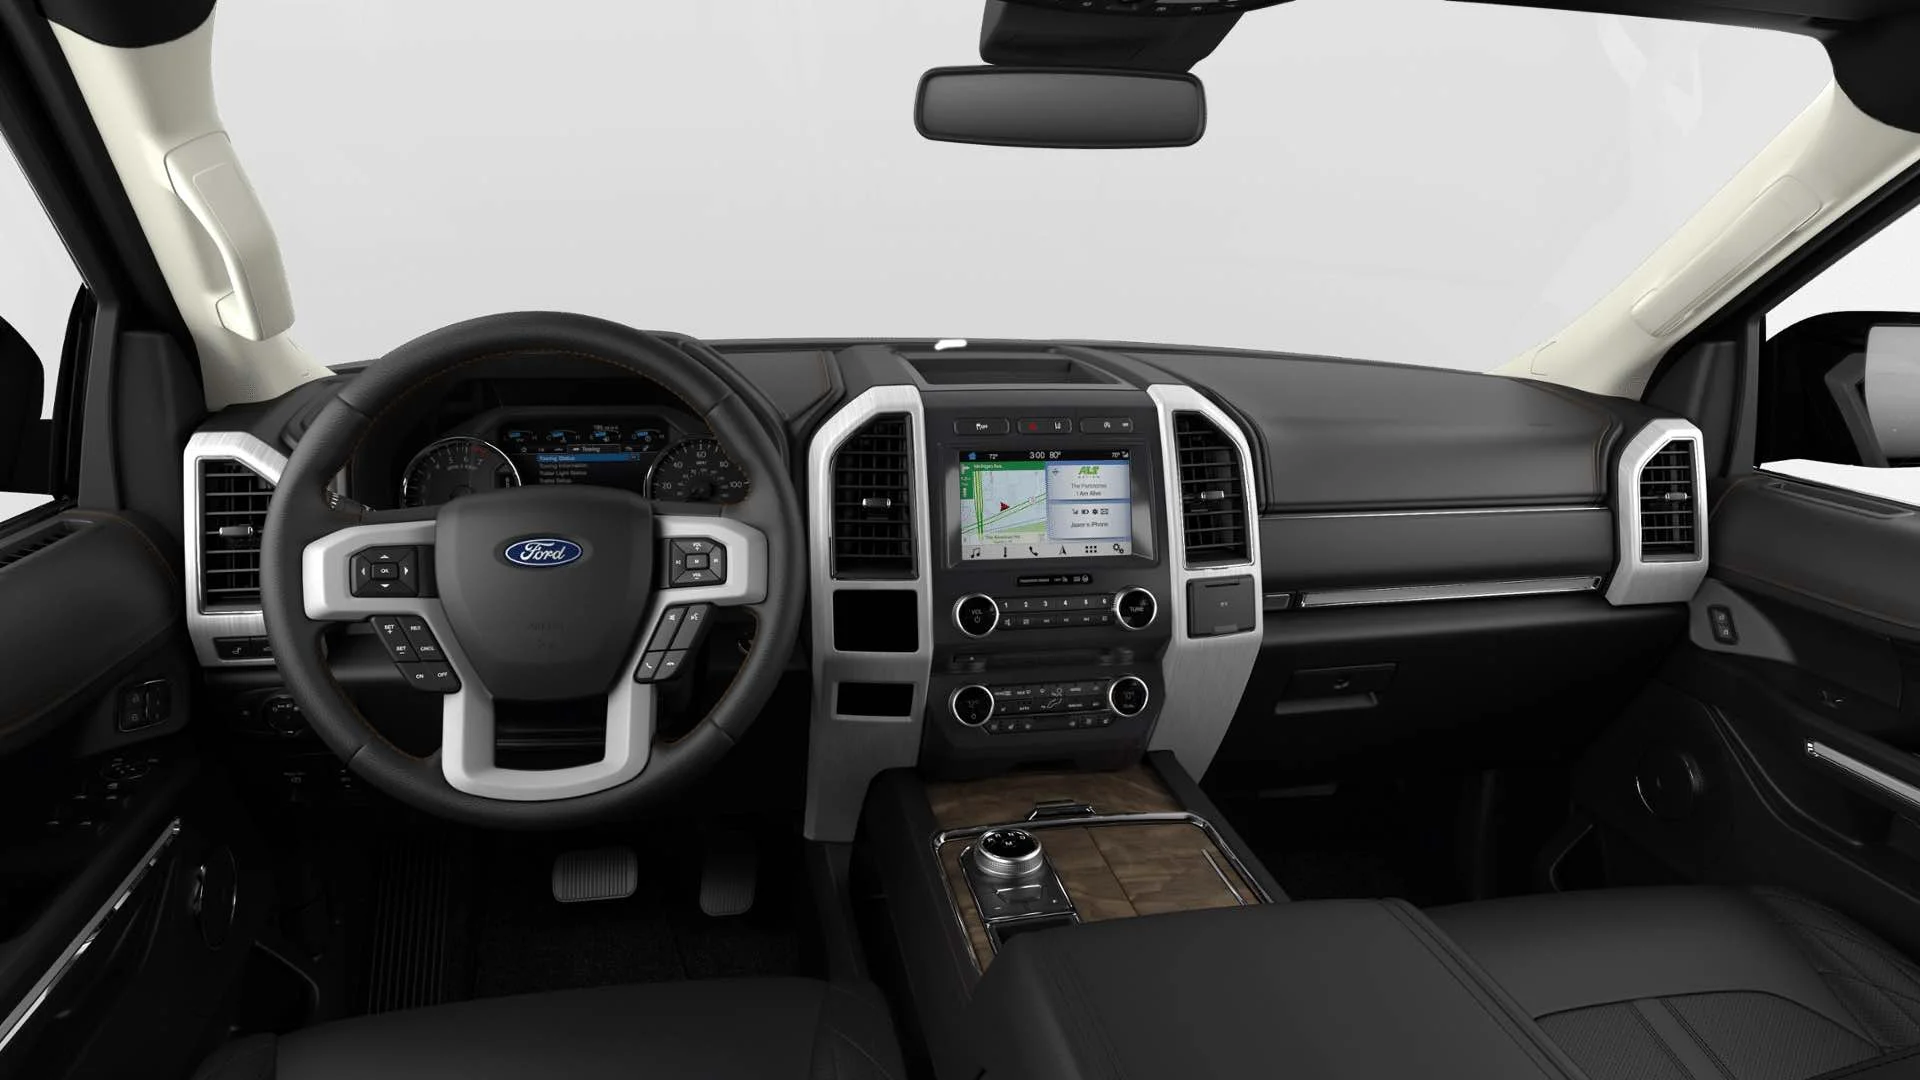 2019 Ford Expedition Interior Colors